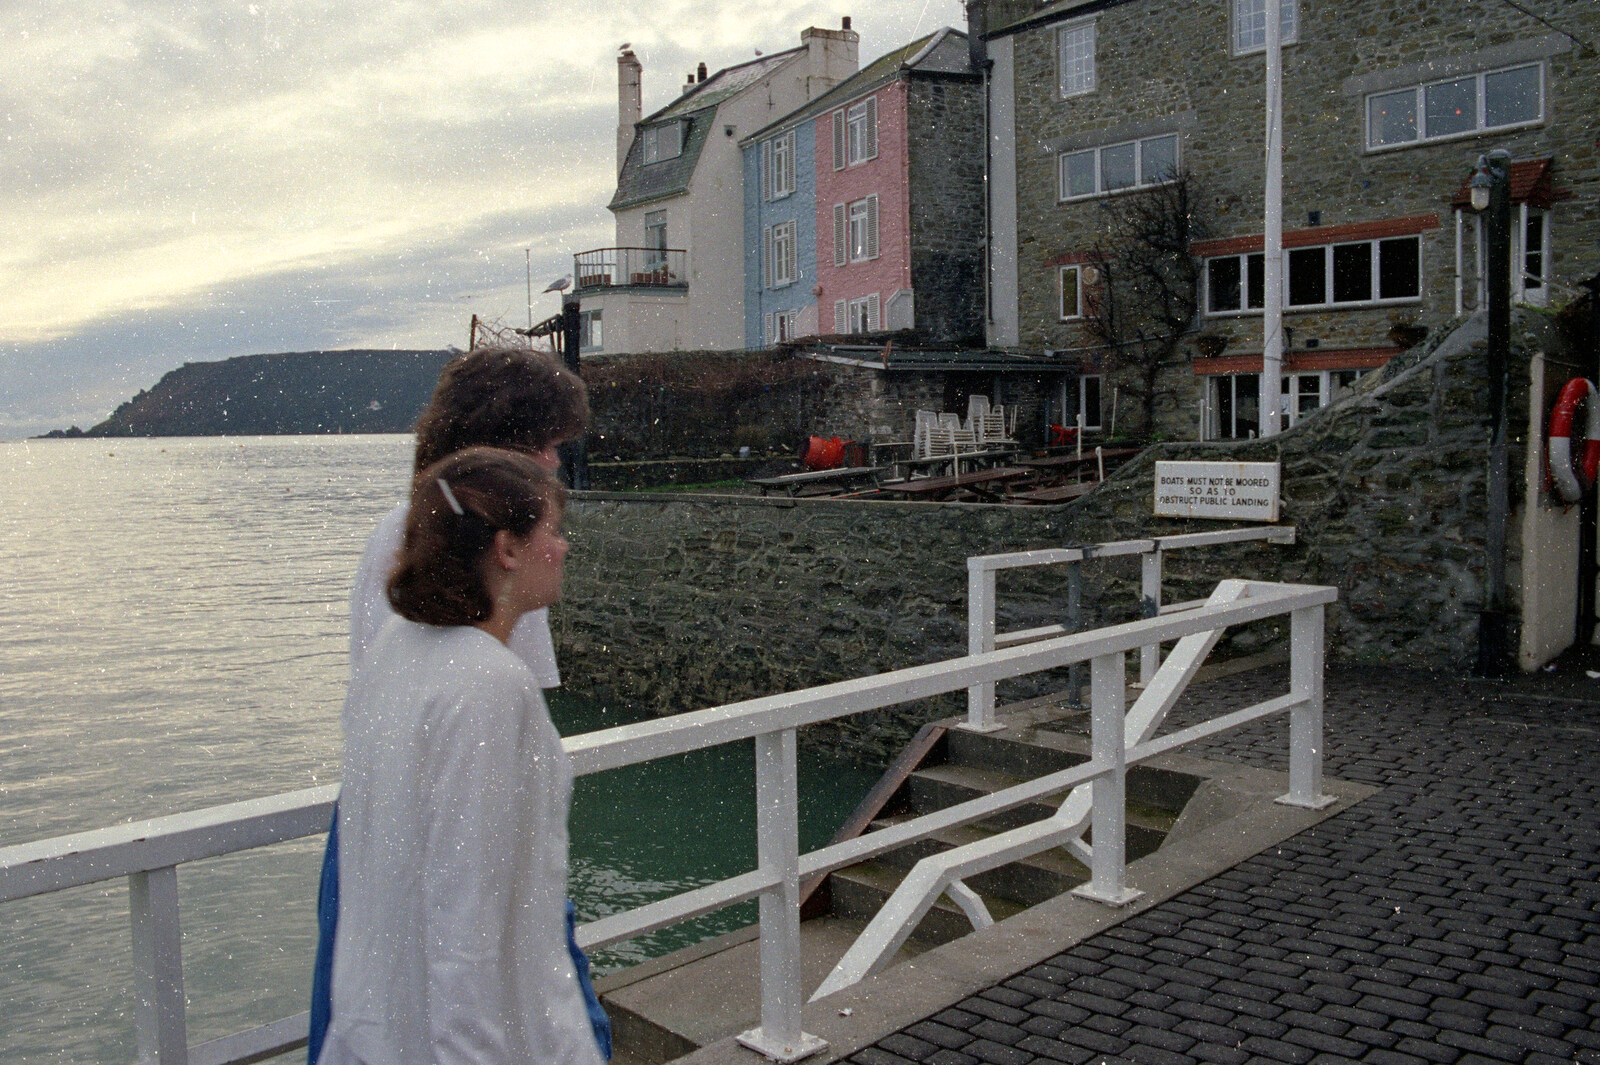 The 'young things' walk into Salcombe from Uni: The Plymouth Polytechnic Satique Project, Salcombe and Plymouth - 10th May 1986